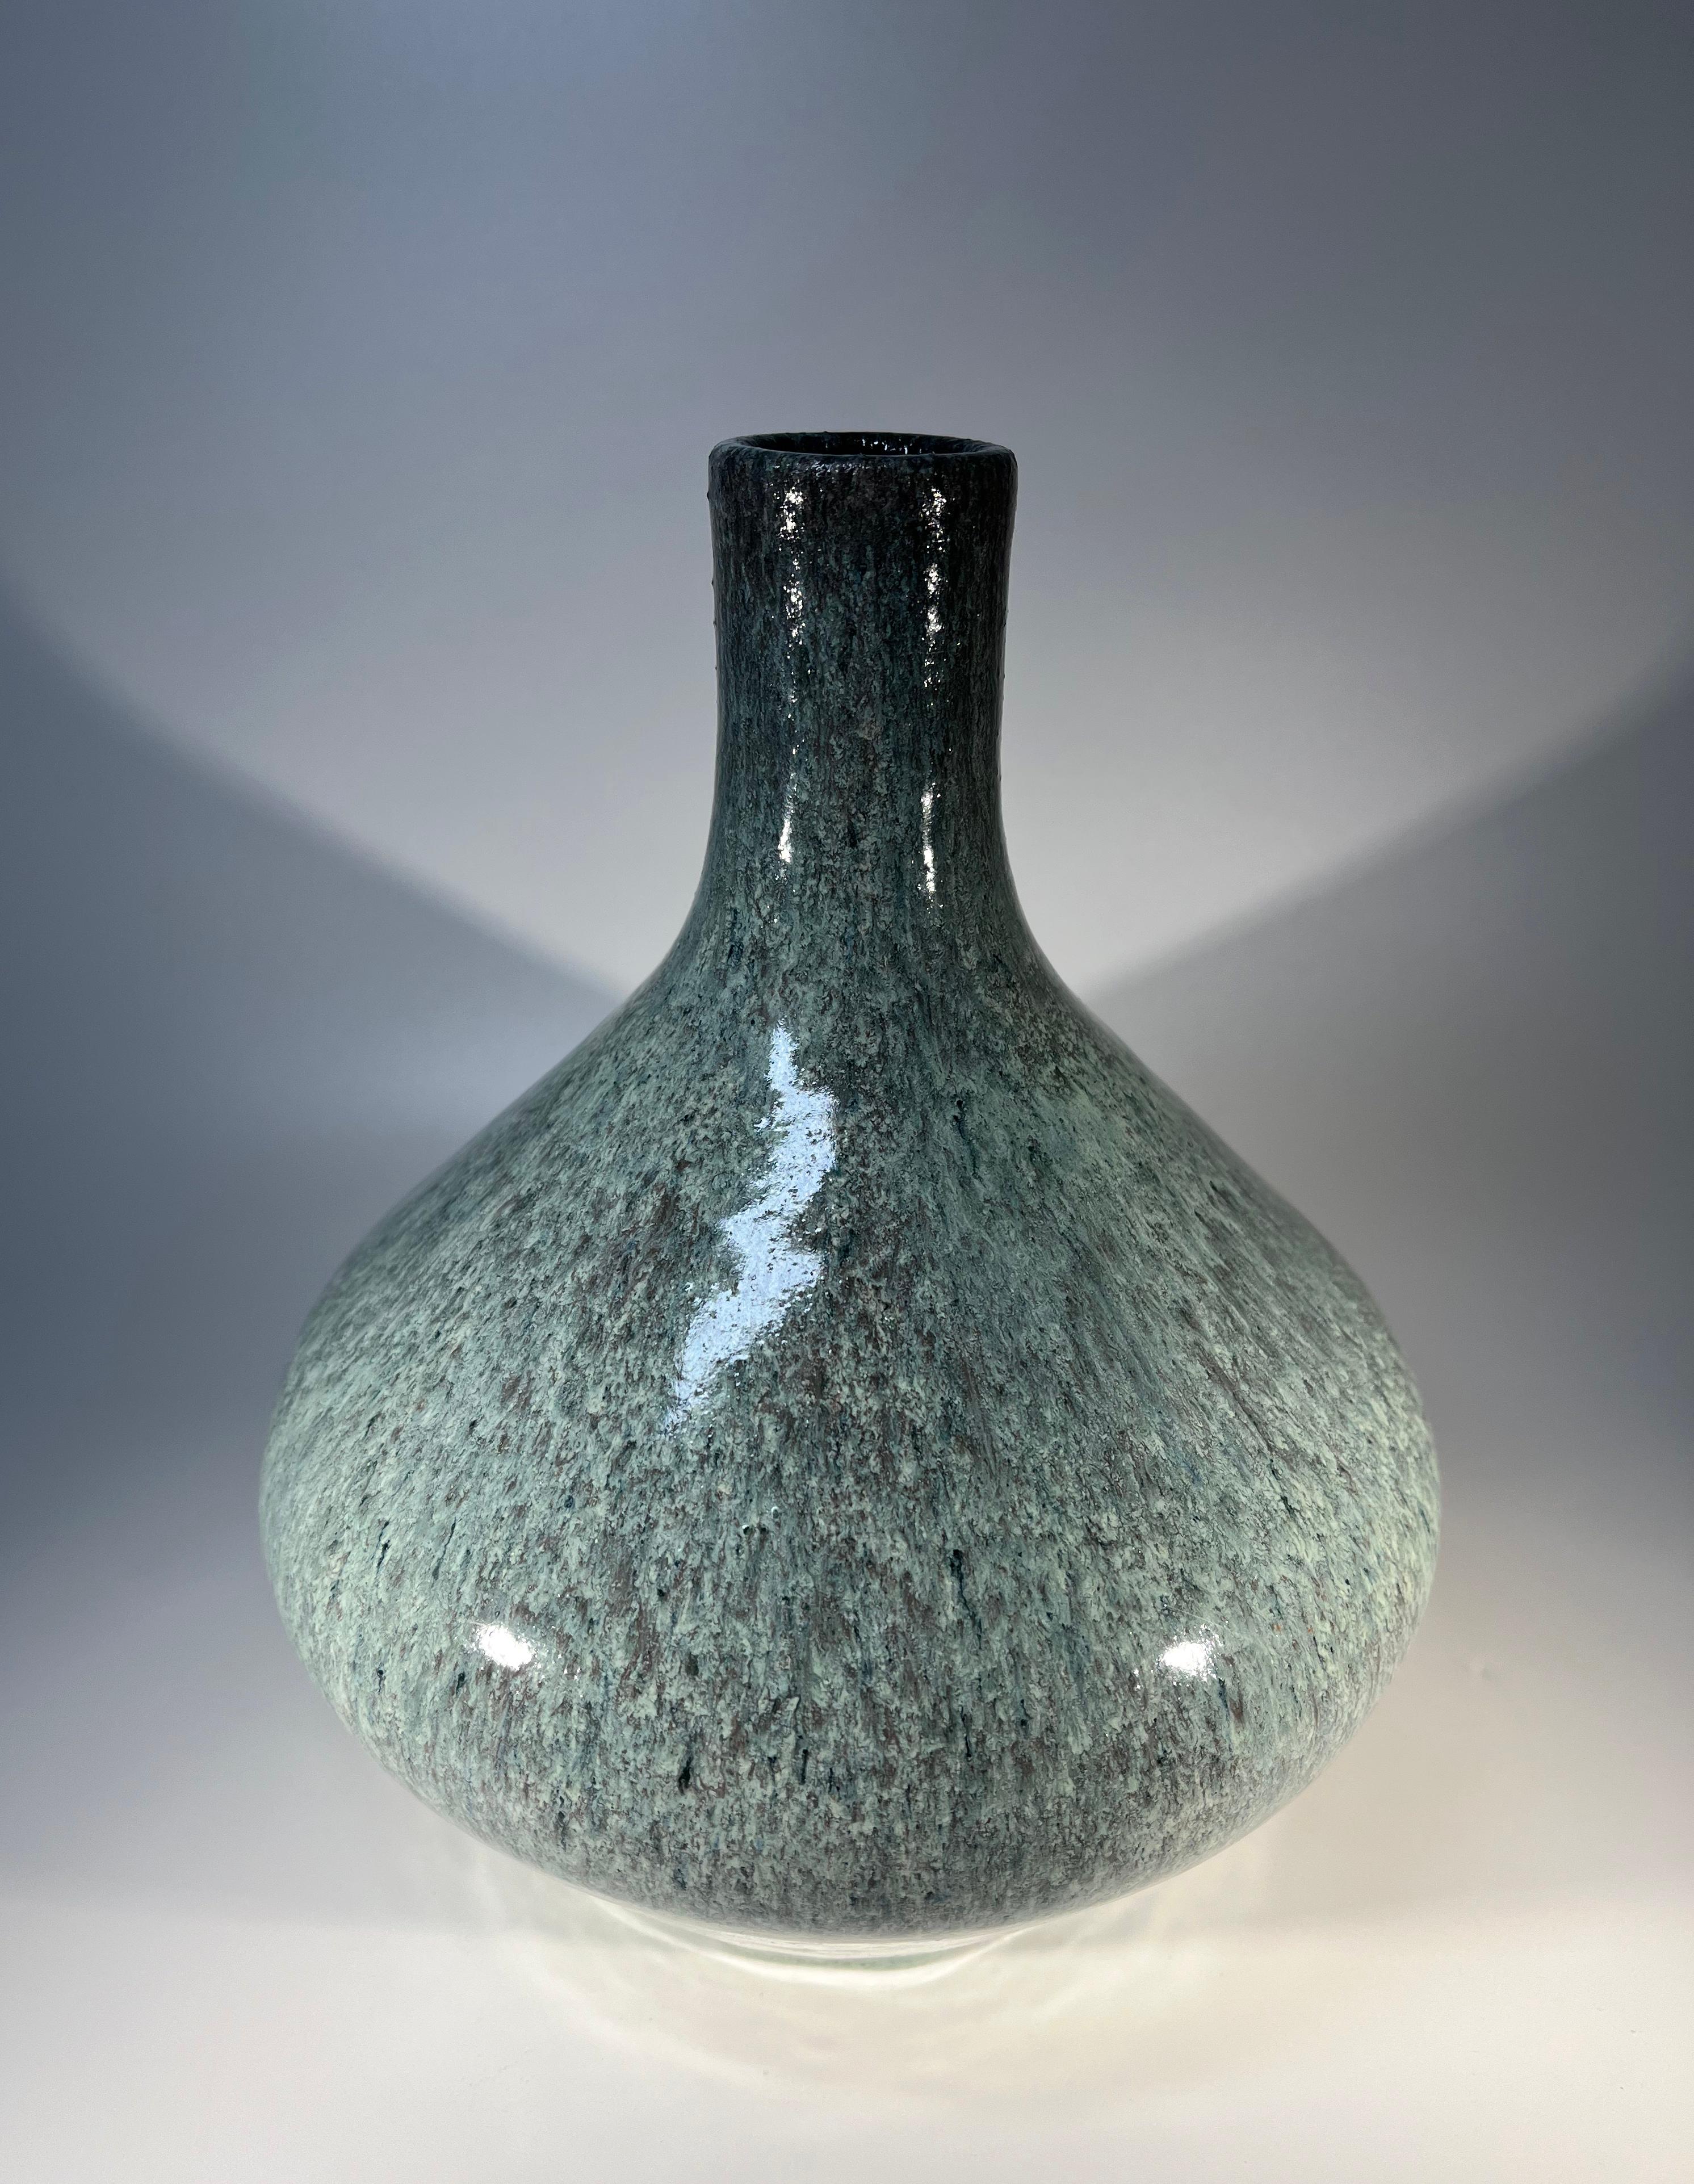 Teardrop By Accolay, Duck Egg Blue Mottled Glaze Ceramic Vase, France 1960's In Excellent Condition For Sale In Rothley, Leicestershire